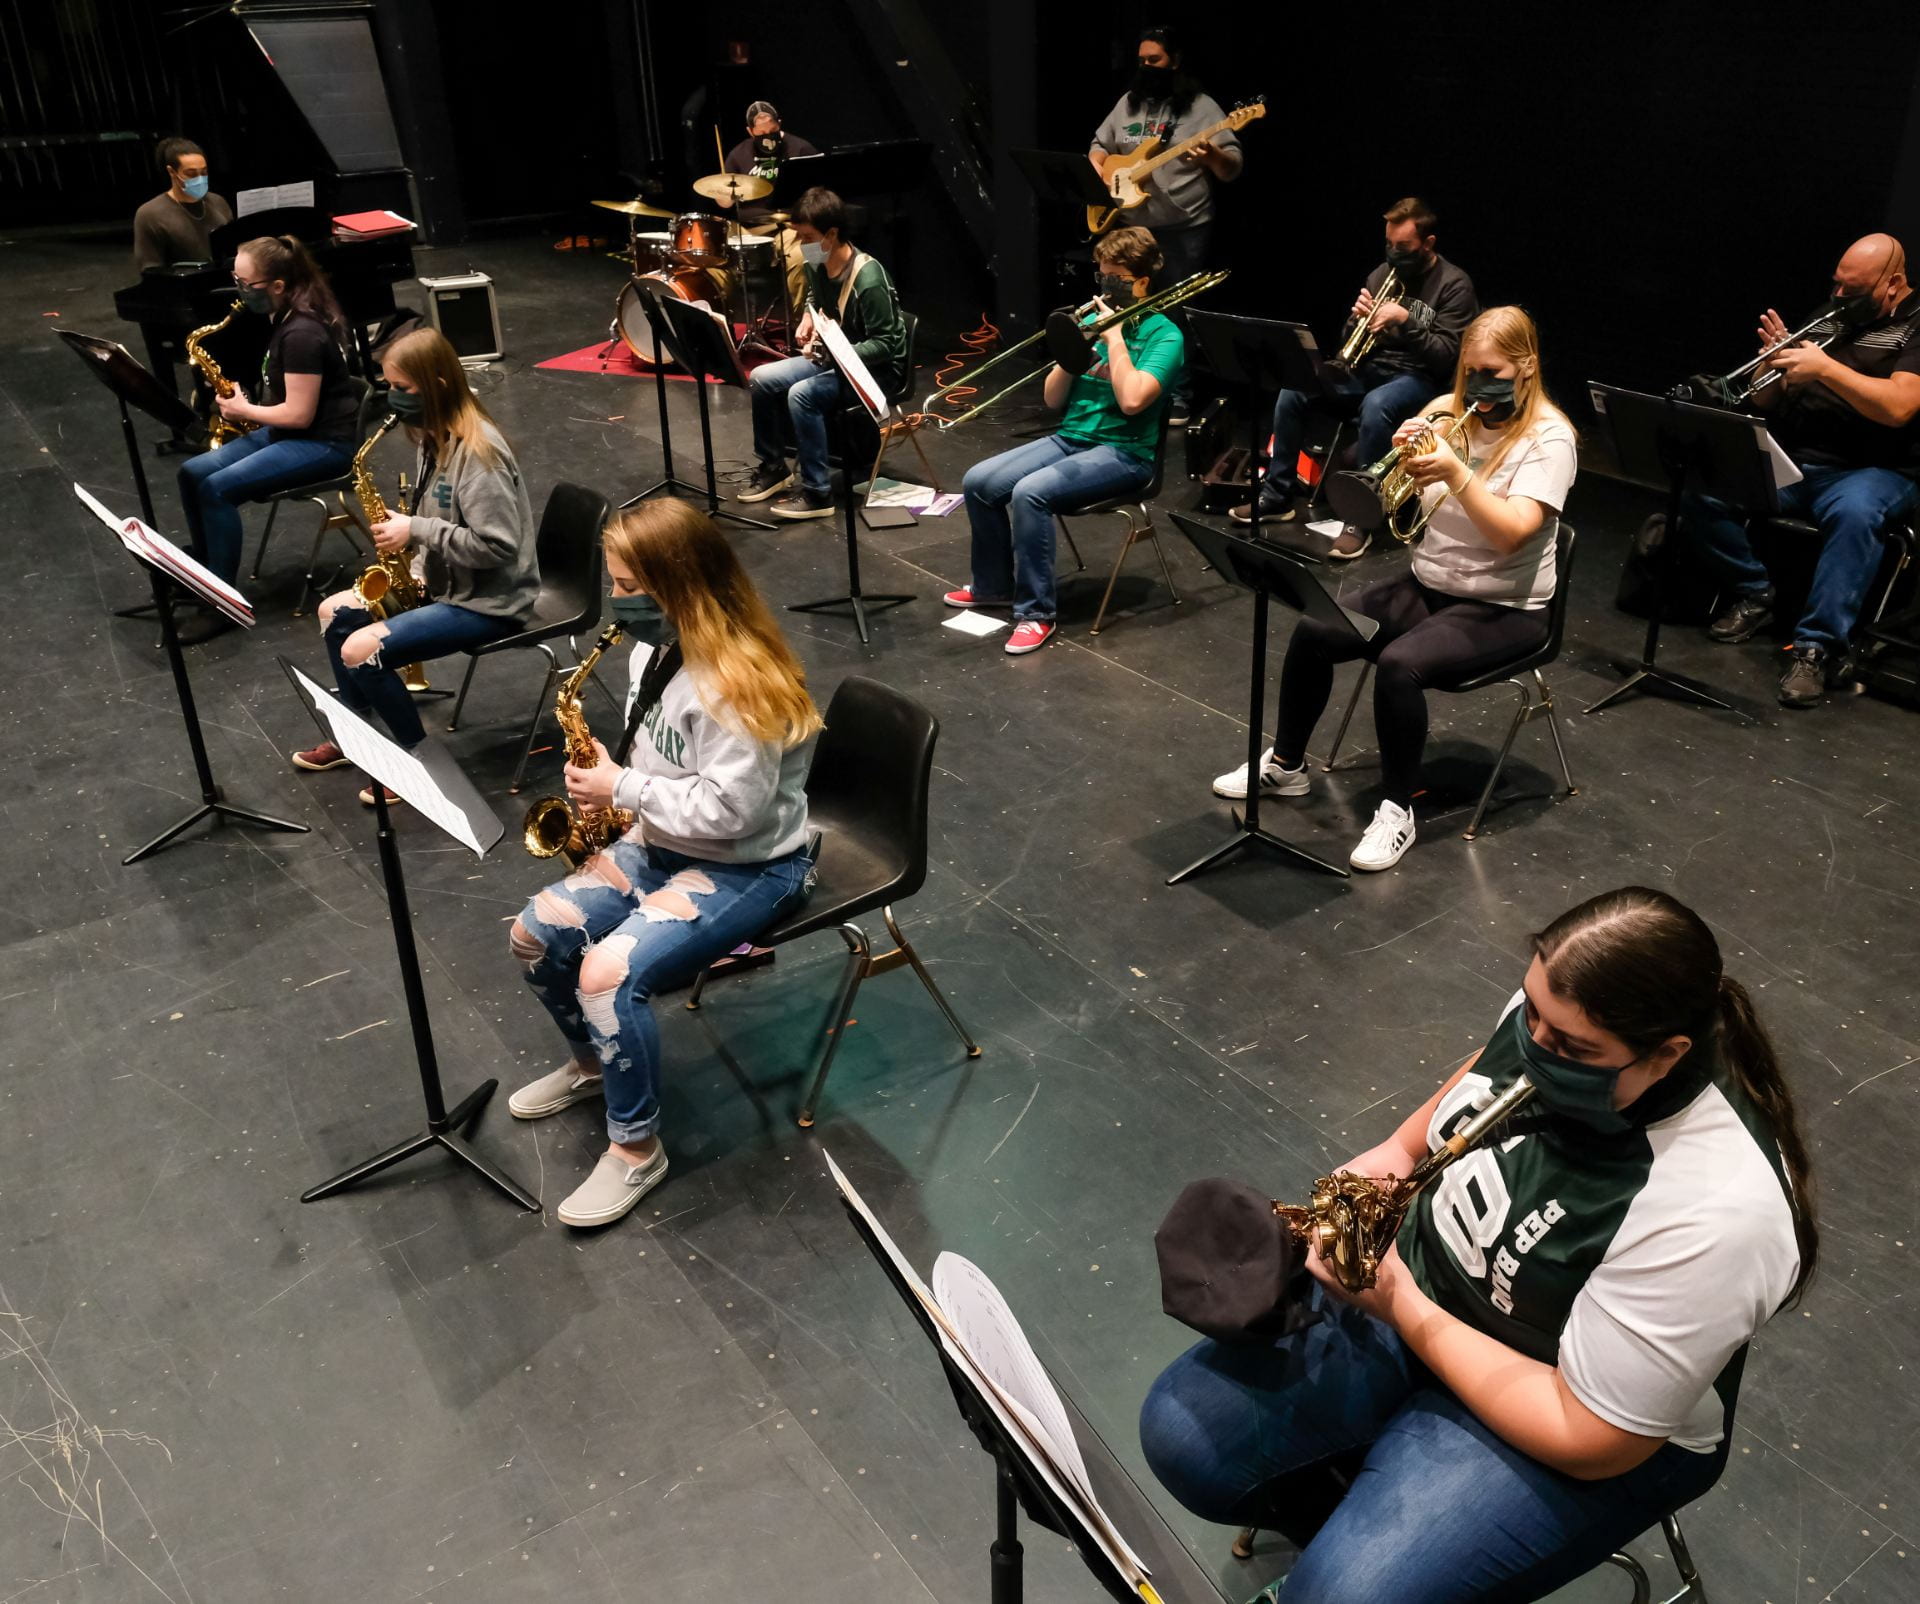 Photo of UW-Green Bay students in Jazz Ensemble class on the main stage at the Weidner Center. Music students use specialized slotted masks, bell covers on brass instruments, and sit 6-feet apart as part of the COVID-19 prevention.